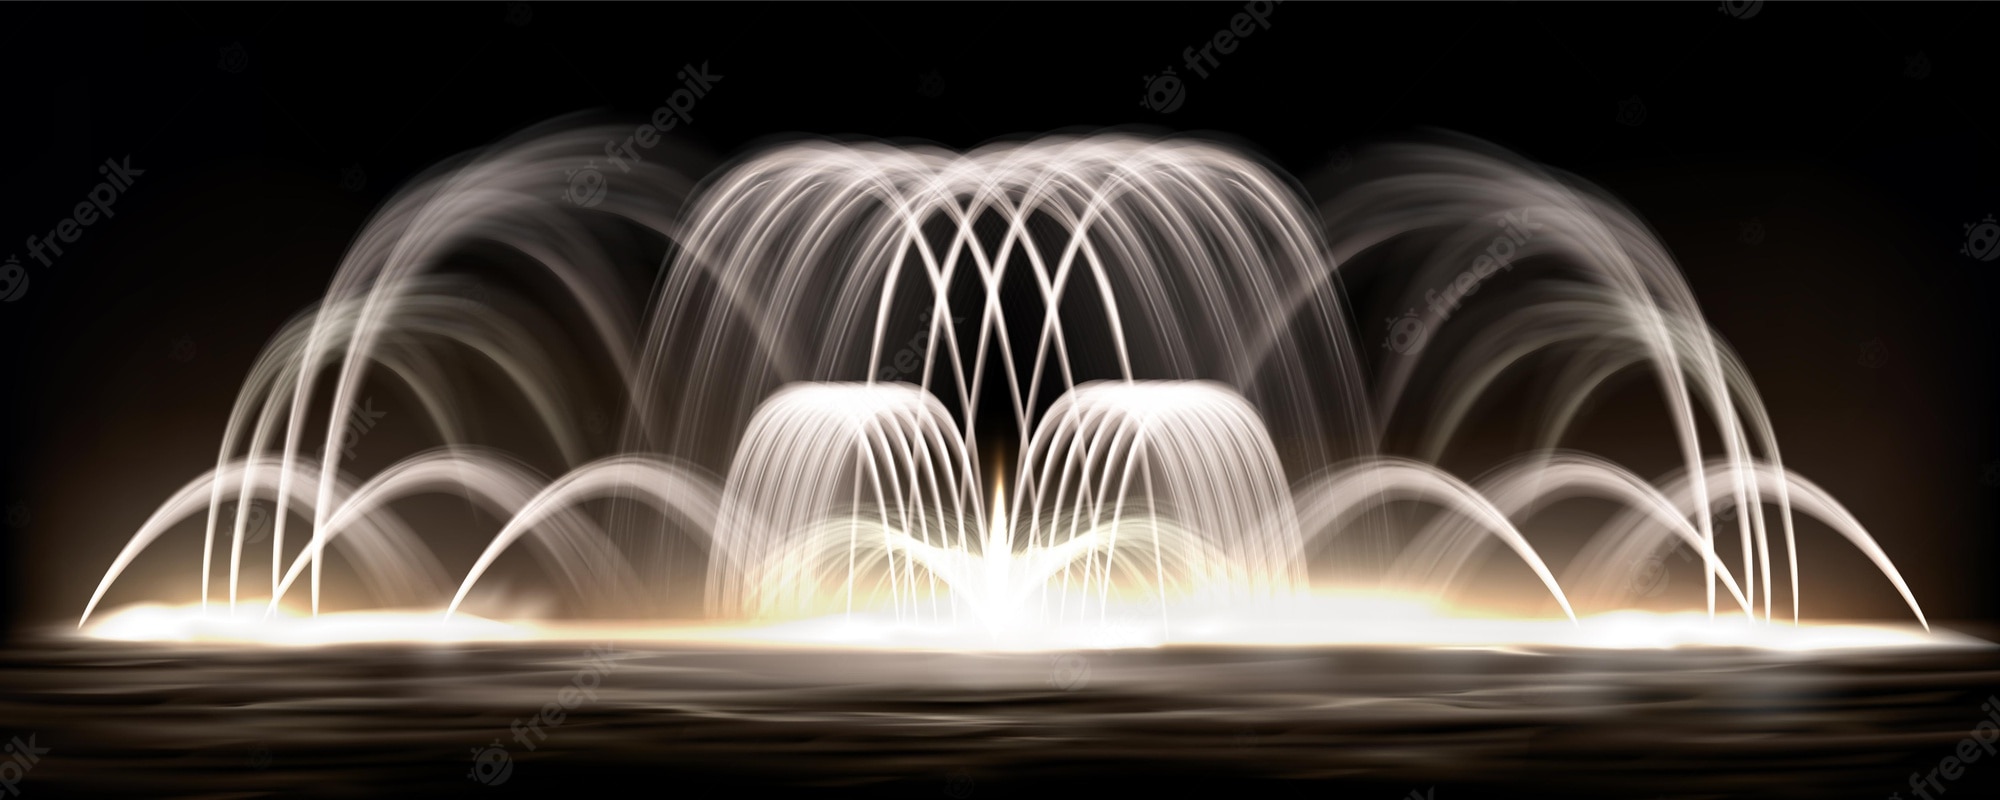 Water Fountain Background